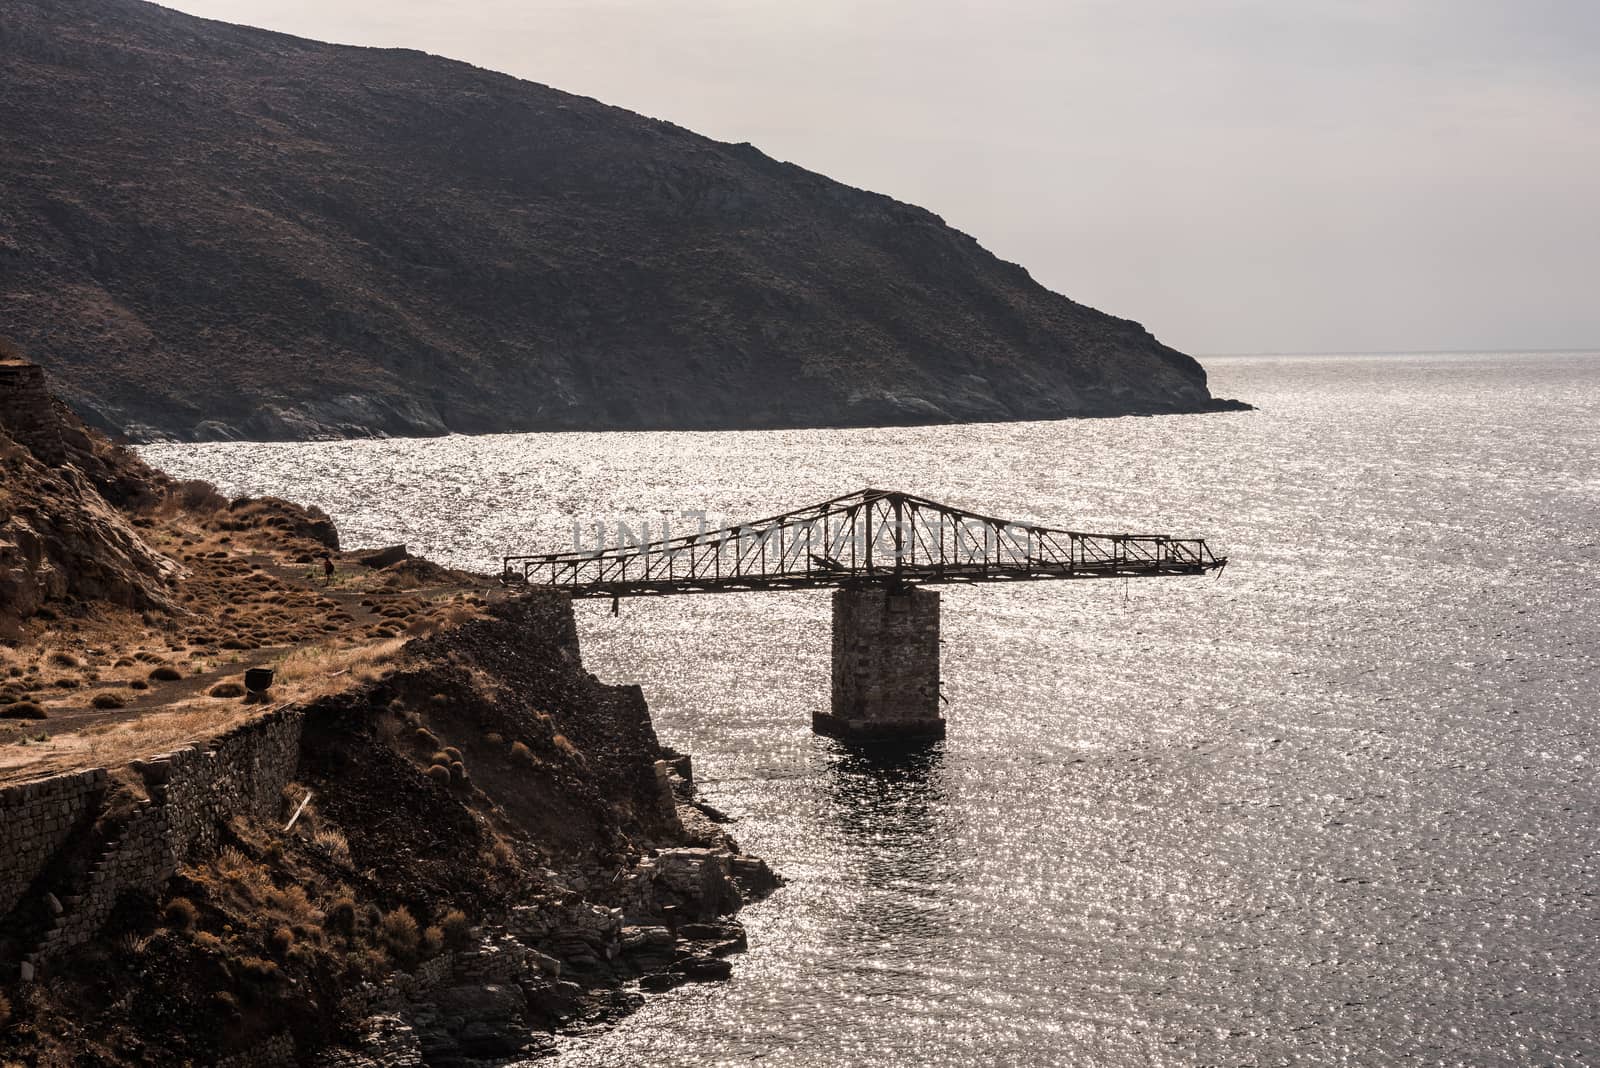 One old, destroyed, abandoned bridge of the old mine of Serifos Island, Cyclades, Greece